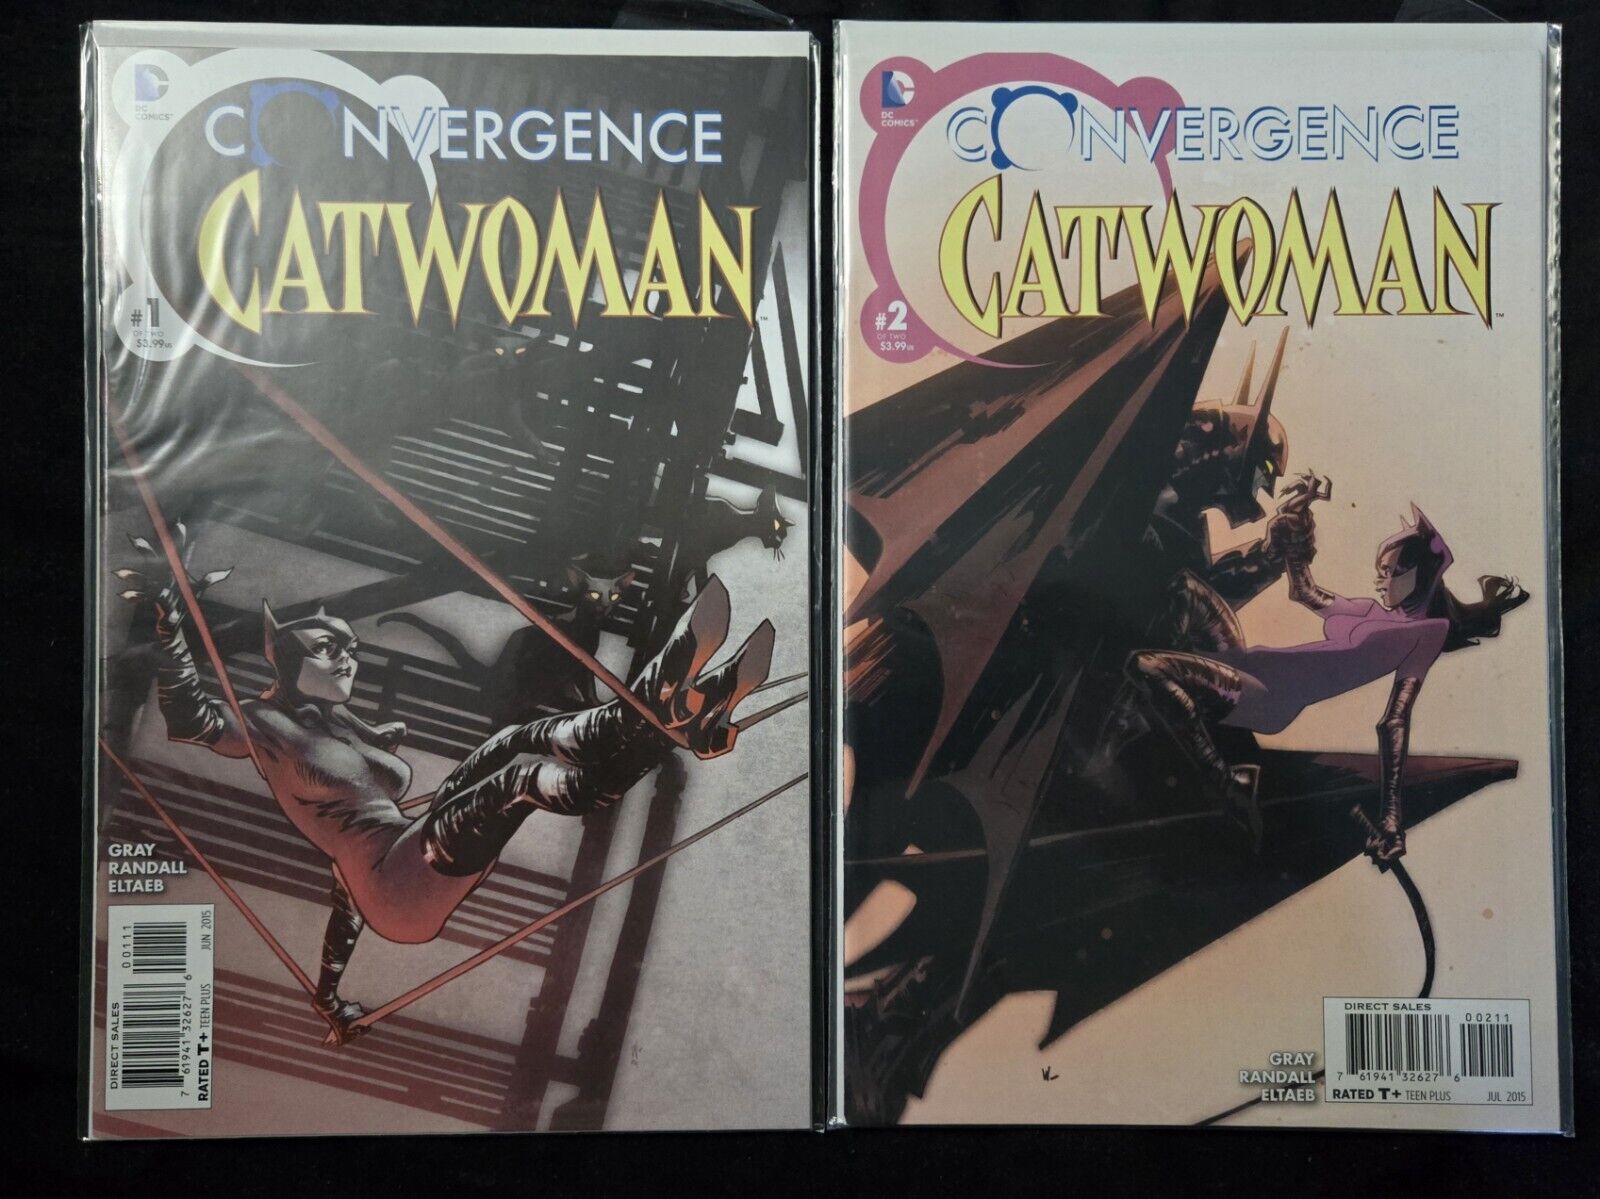 CONVERGENCE CATWOMAN #1-2 (DC/2015/GRAY/RANDALL/ELTAEB) COMPLETE SET OF 2